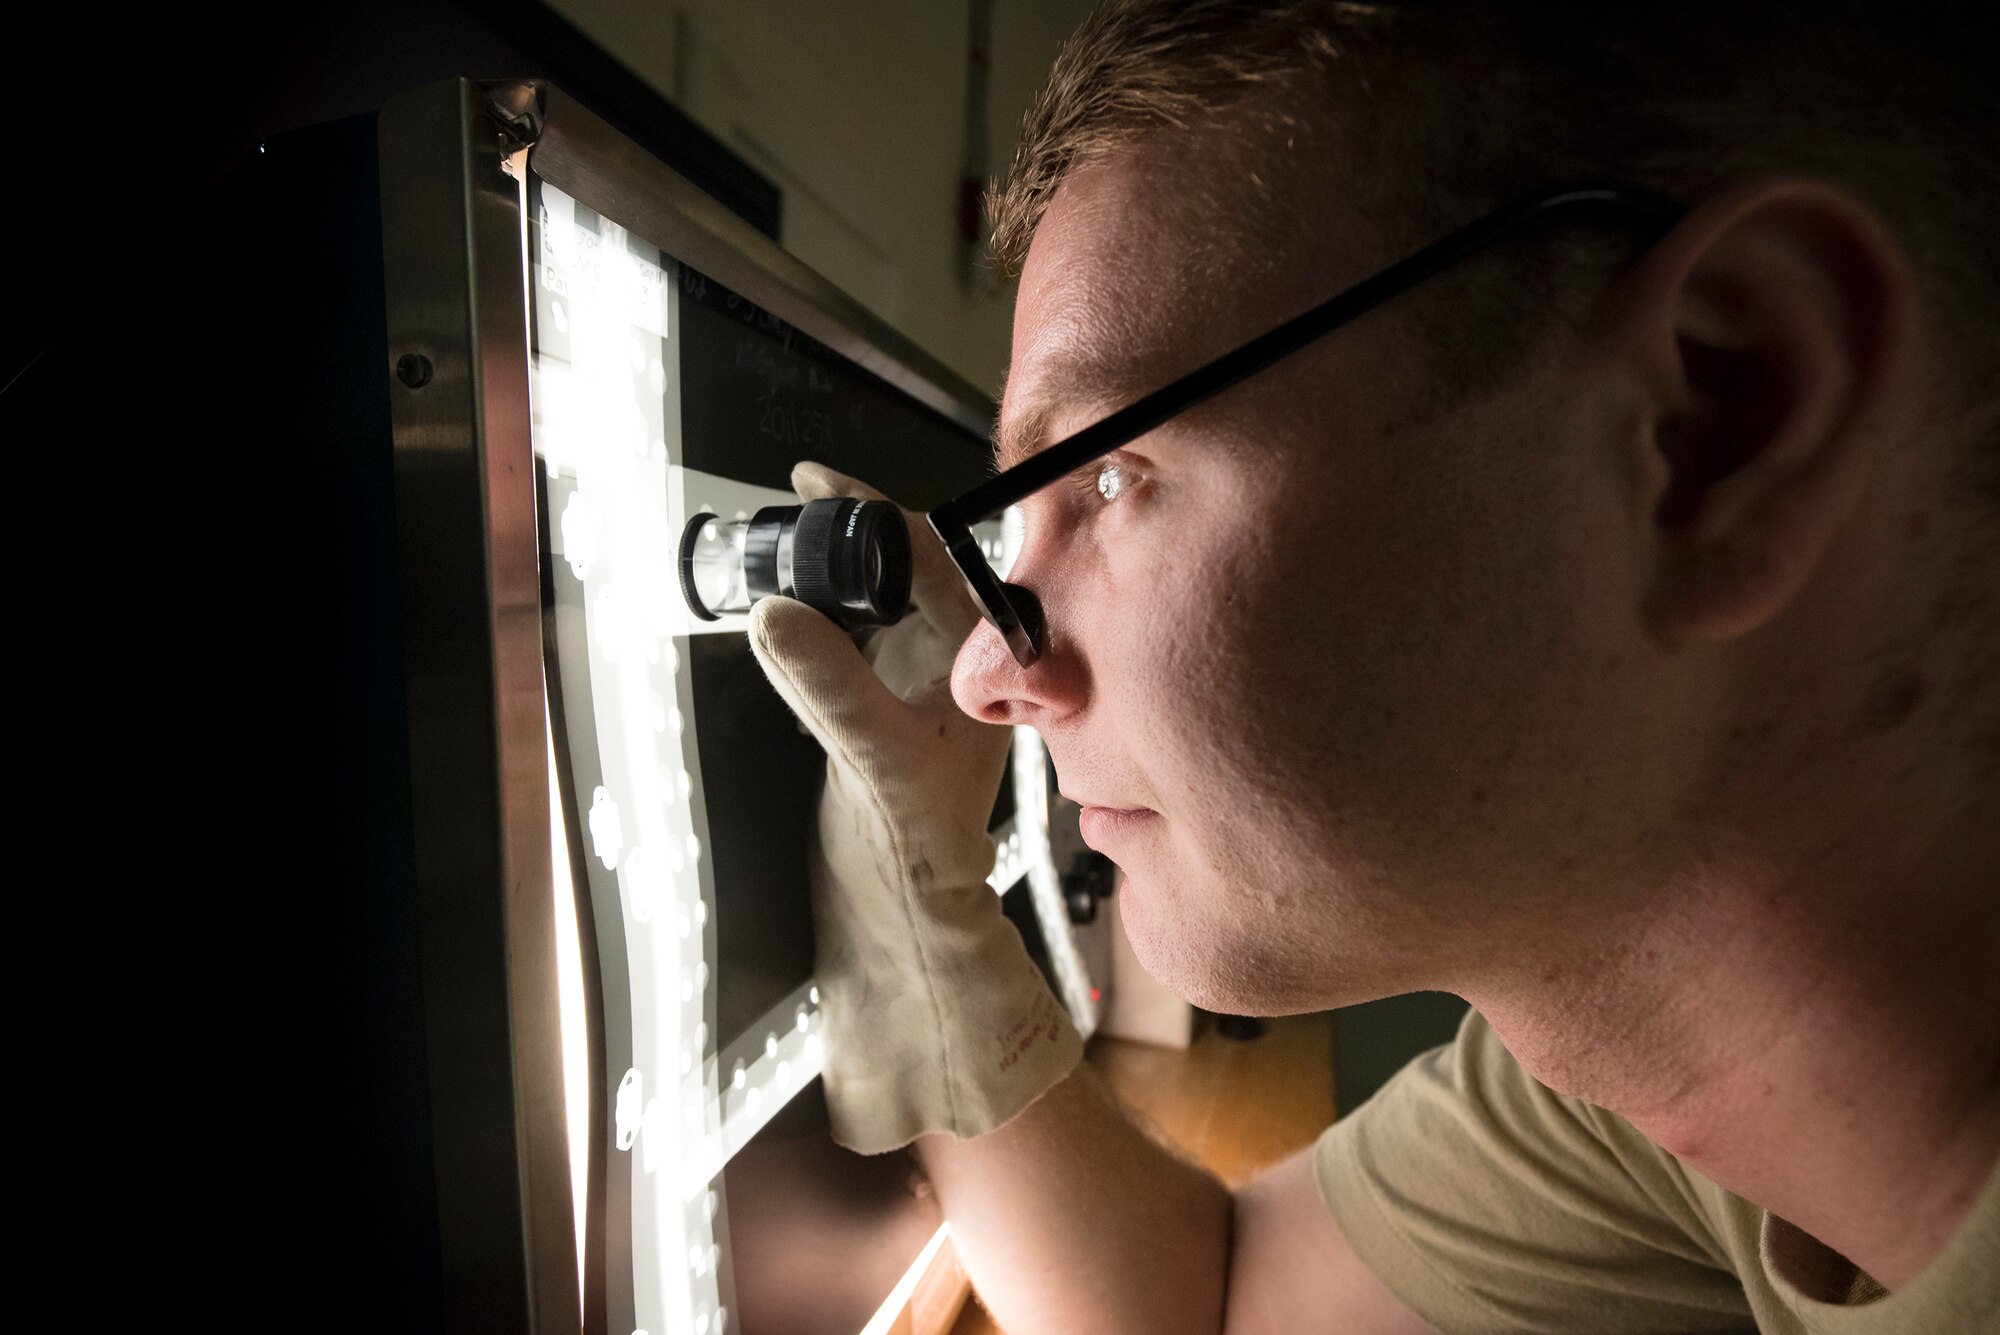 Senior Airman Austin Aldridge, 23d Maintenance Squadron non-destructive inspection (NDI) specialist, inspects an aircraft part through an X-ray, May 2, 2018, at Moody Air Force Base, Ga. NDI technicians use various methods to complete these inspections such as X-ray, florescent dye penetrant, oil analysis and ultrasonic scanning to examine and inspect numerous aircraft parts and components to ensure that they are in usable condition. (U.S. Air Force photo by Airman 1st Class Eugene Oliver)